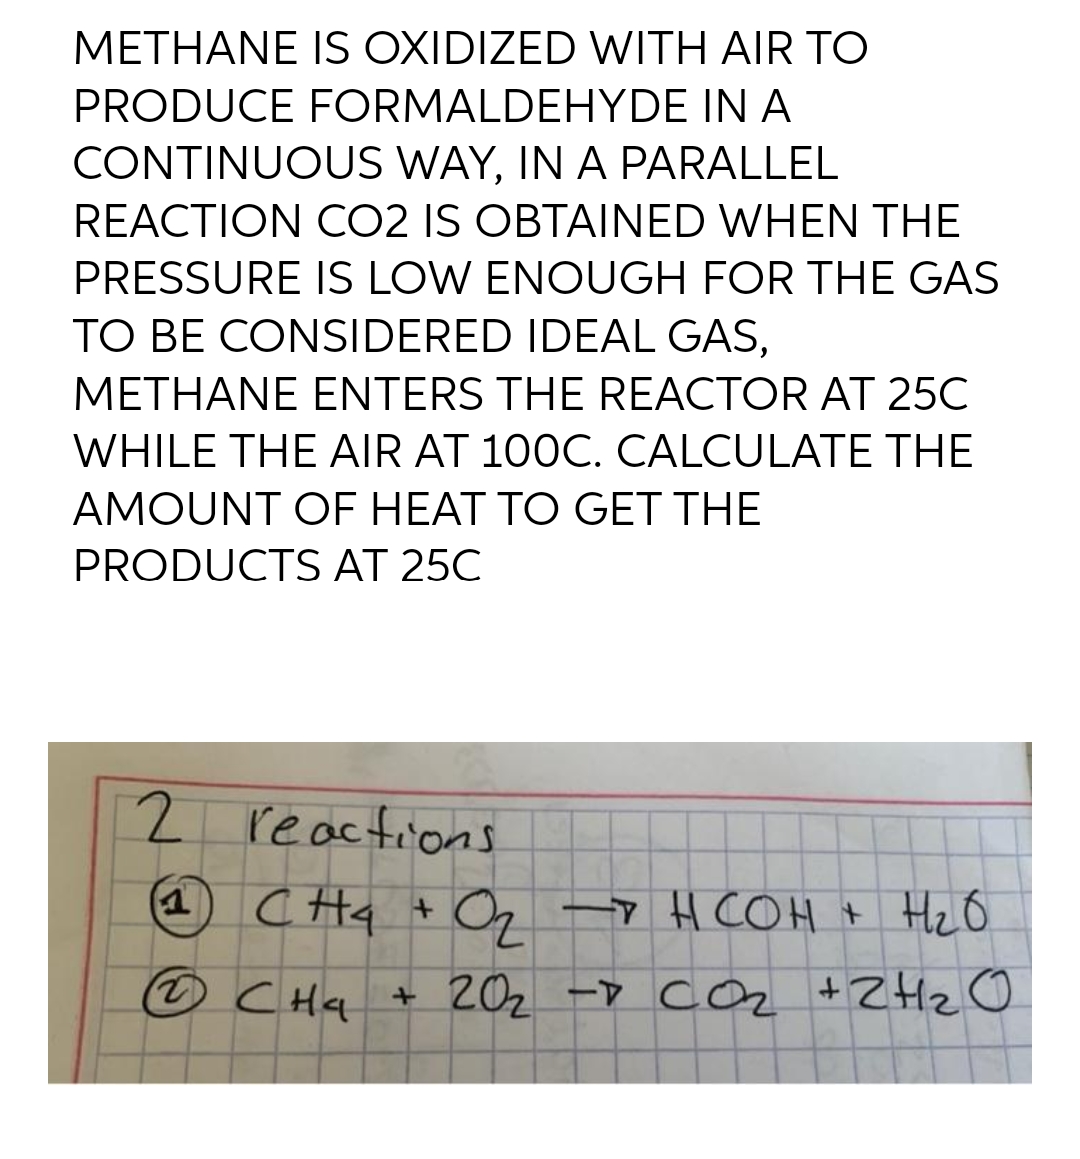 METHANE IS OXIDIZED WITH AIR TO
PRODUCE FORMALDEHYDE IN A
CONTINUOUS WAY, IN A PARALLEL
REACTION CO2 IS OBTAINED WHEN THE
PRESSURE IS LOW ENOUGH FOR THE GAS
TO BE CONSIDERED IDEAL GAS,
METHANE ENTERS THE REACTOR AT 25C
WHILE THE AIR AT 100C. CALCULATE THE
AMOUNT OF HEAT TO GET THE
PRODUCTS AT 25C
2 reactions
(1) CH₂
CH₂ + O₂ → HCOH + H₂O
Ⓒ CH₂ + 20₂ - CO₂ + 2H₂O
2